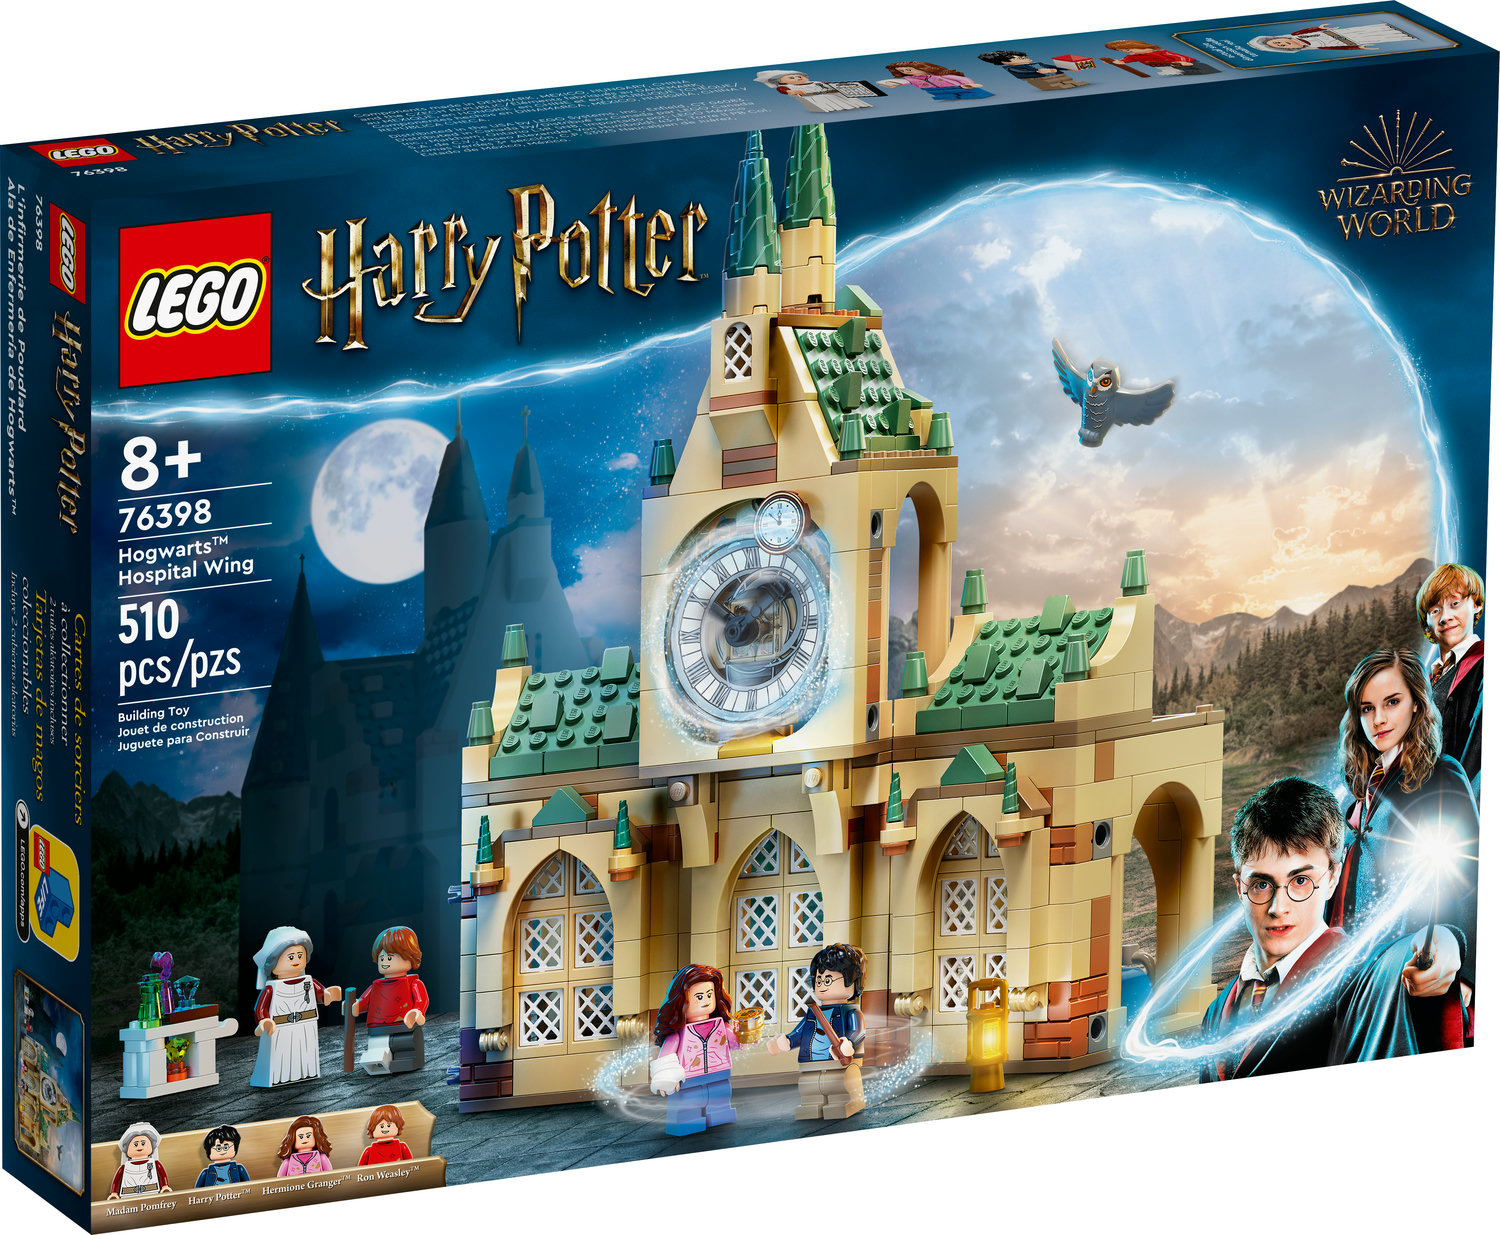 LEGO Harry Potter tbd-HP-3-2022-playset 76398 - image 3 of 10